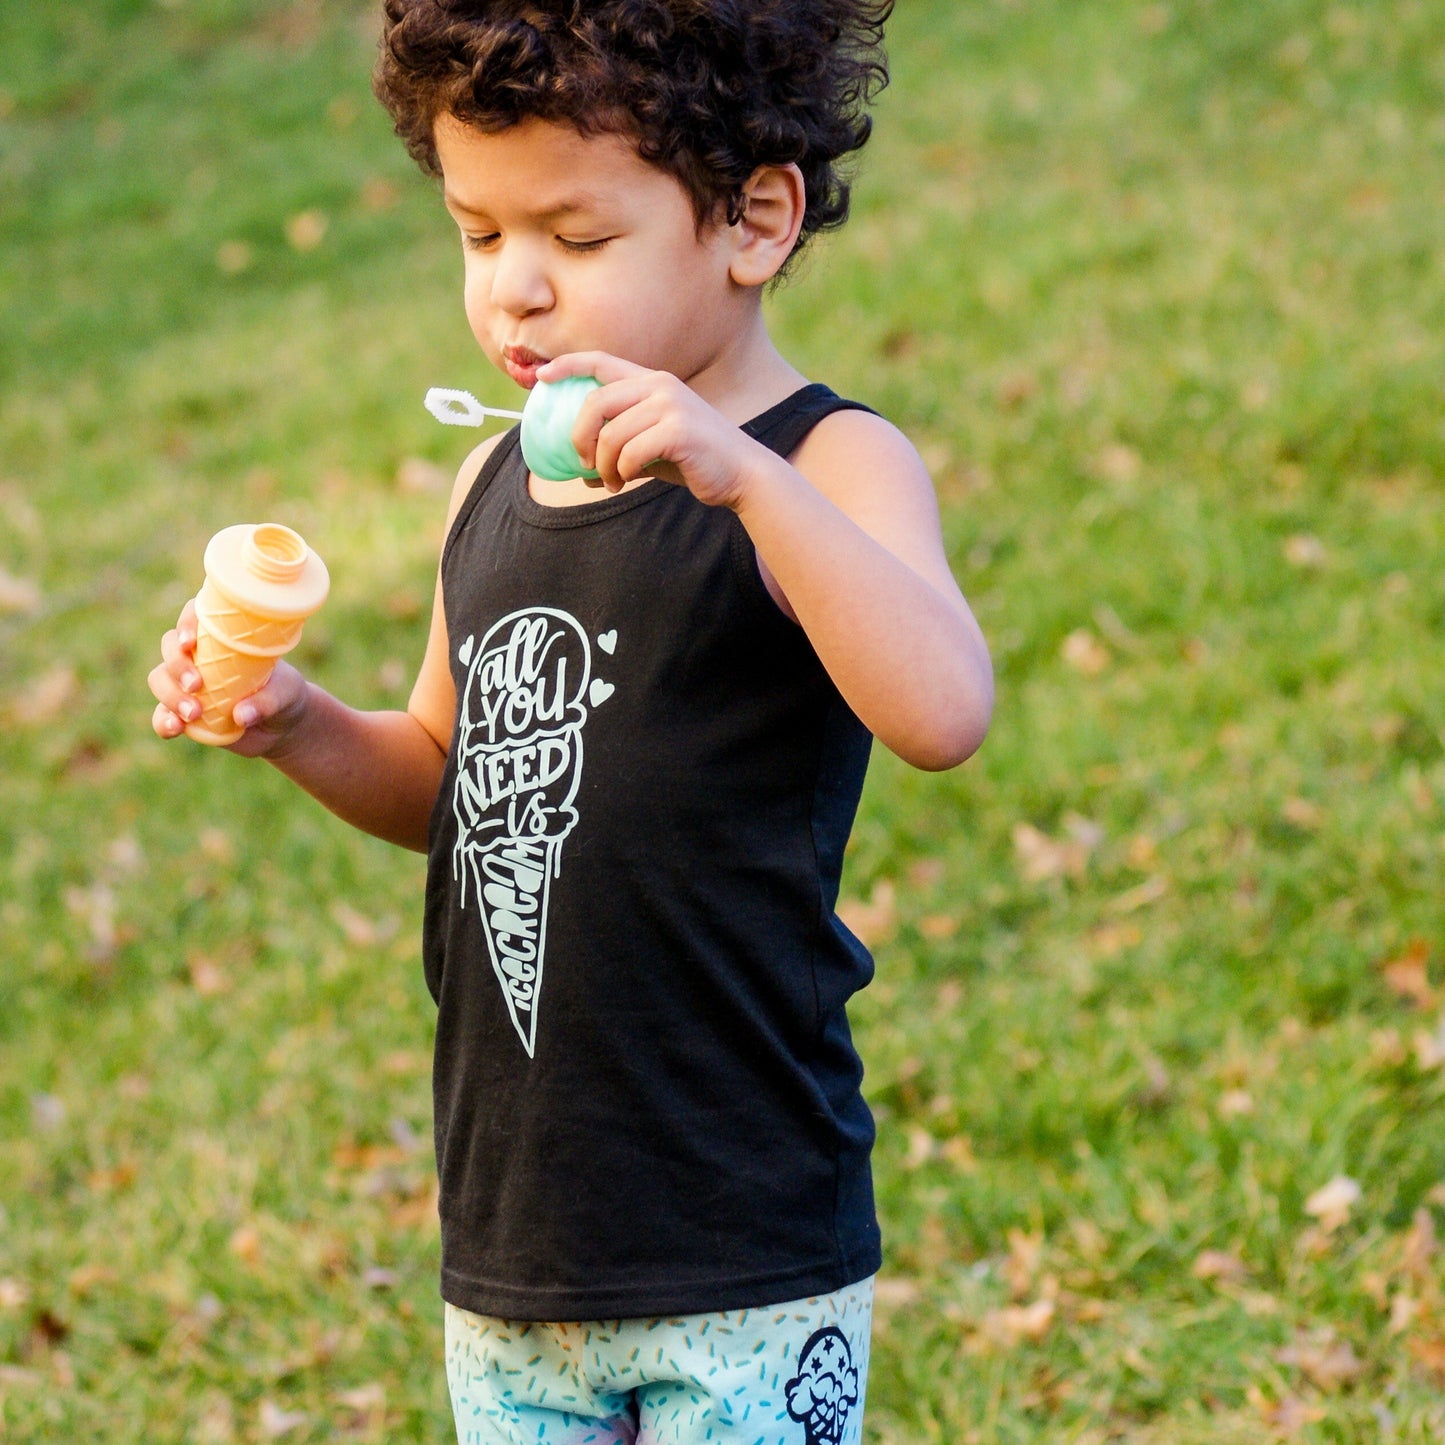 All you need is ice cream BLACK tank top